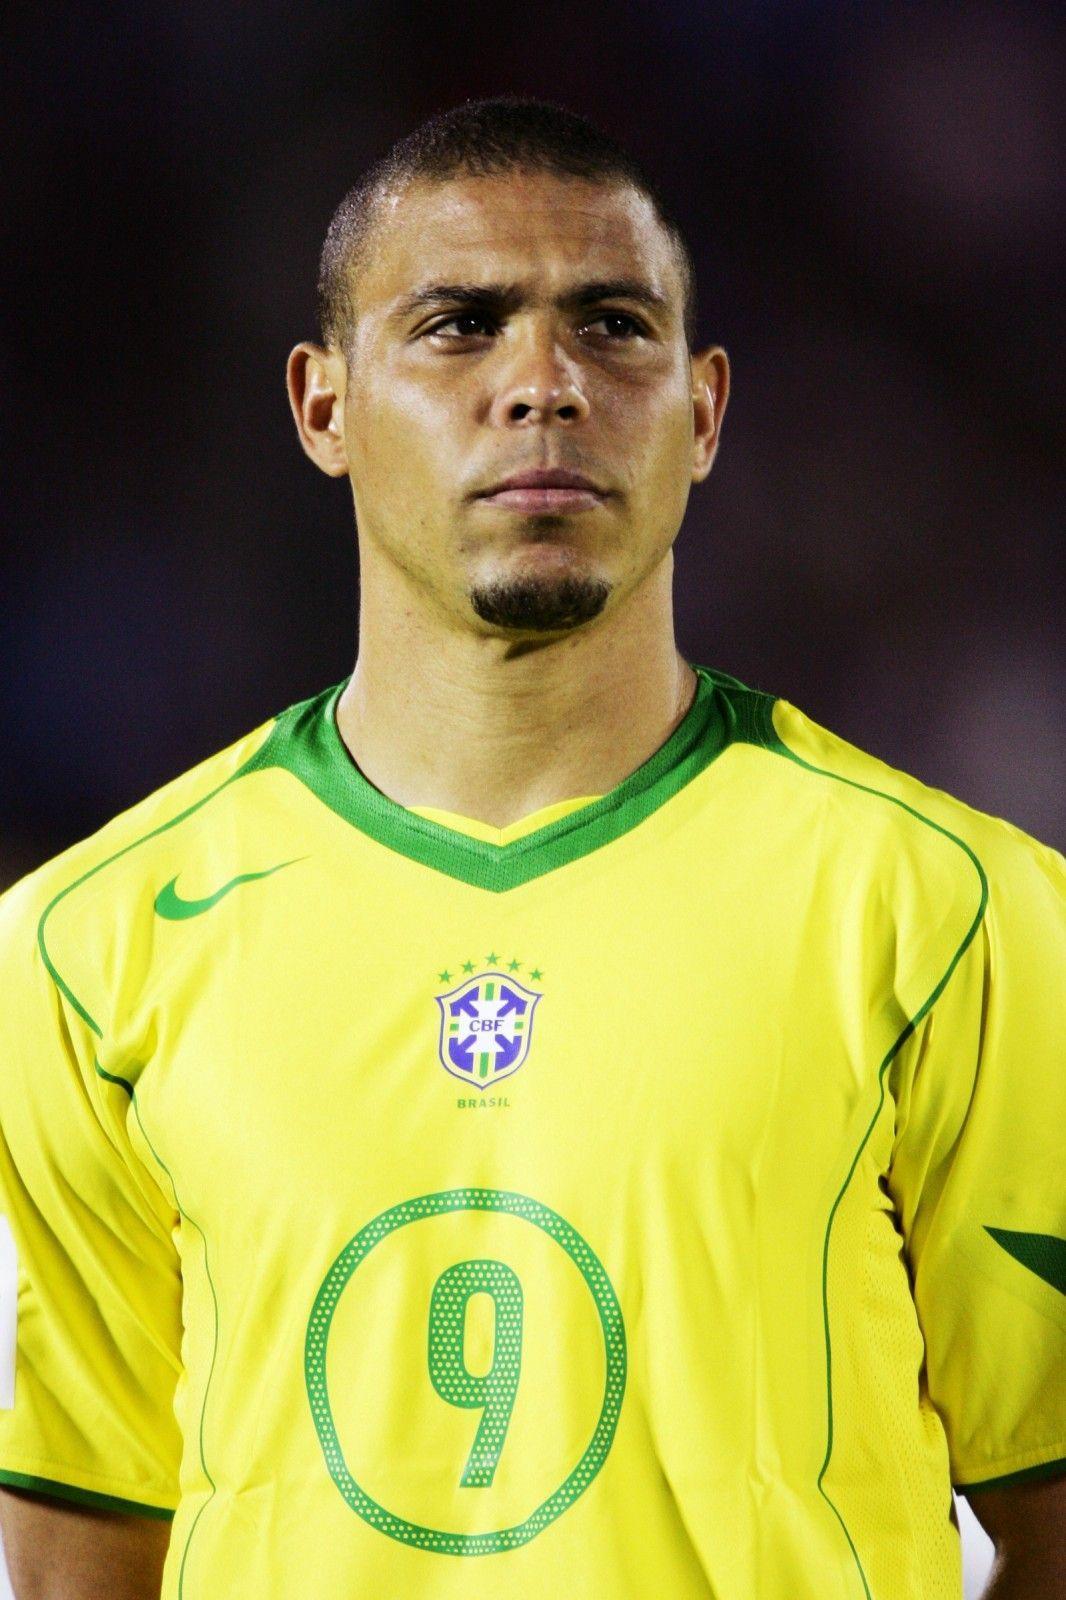 Ronaldo Brazilian Soccer Player Pictures to Pin